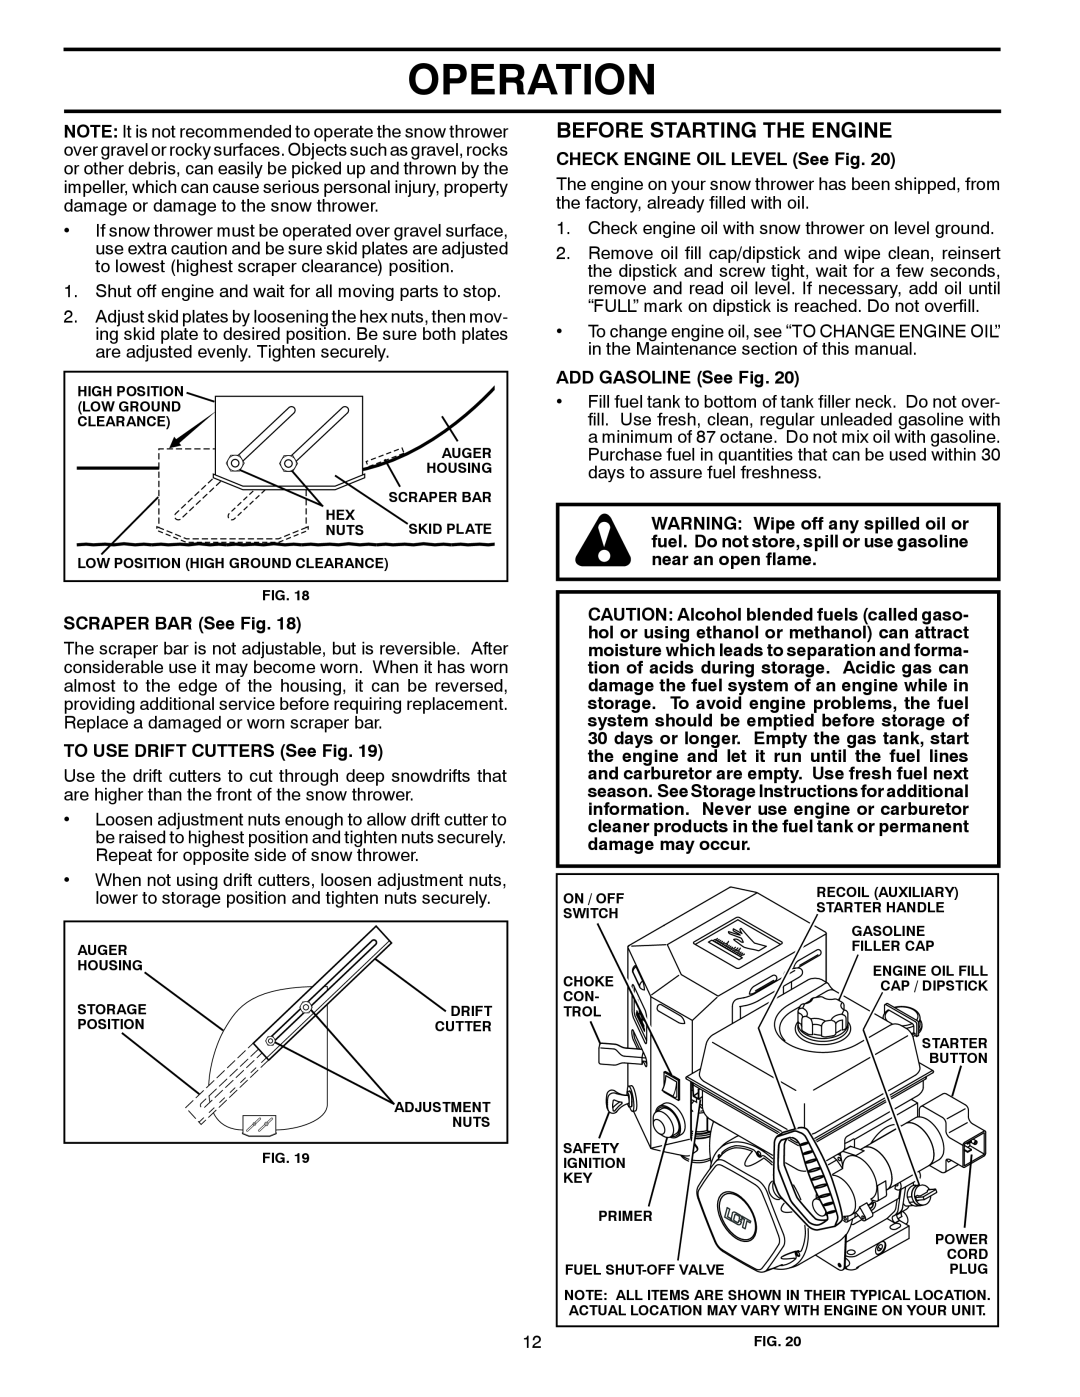 Poulan 428553, 96192003200 Before Starting The Engine, Operation, SCRAPER BAR See Fig, TO USE DRIFT CUTTERS See Fig 